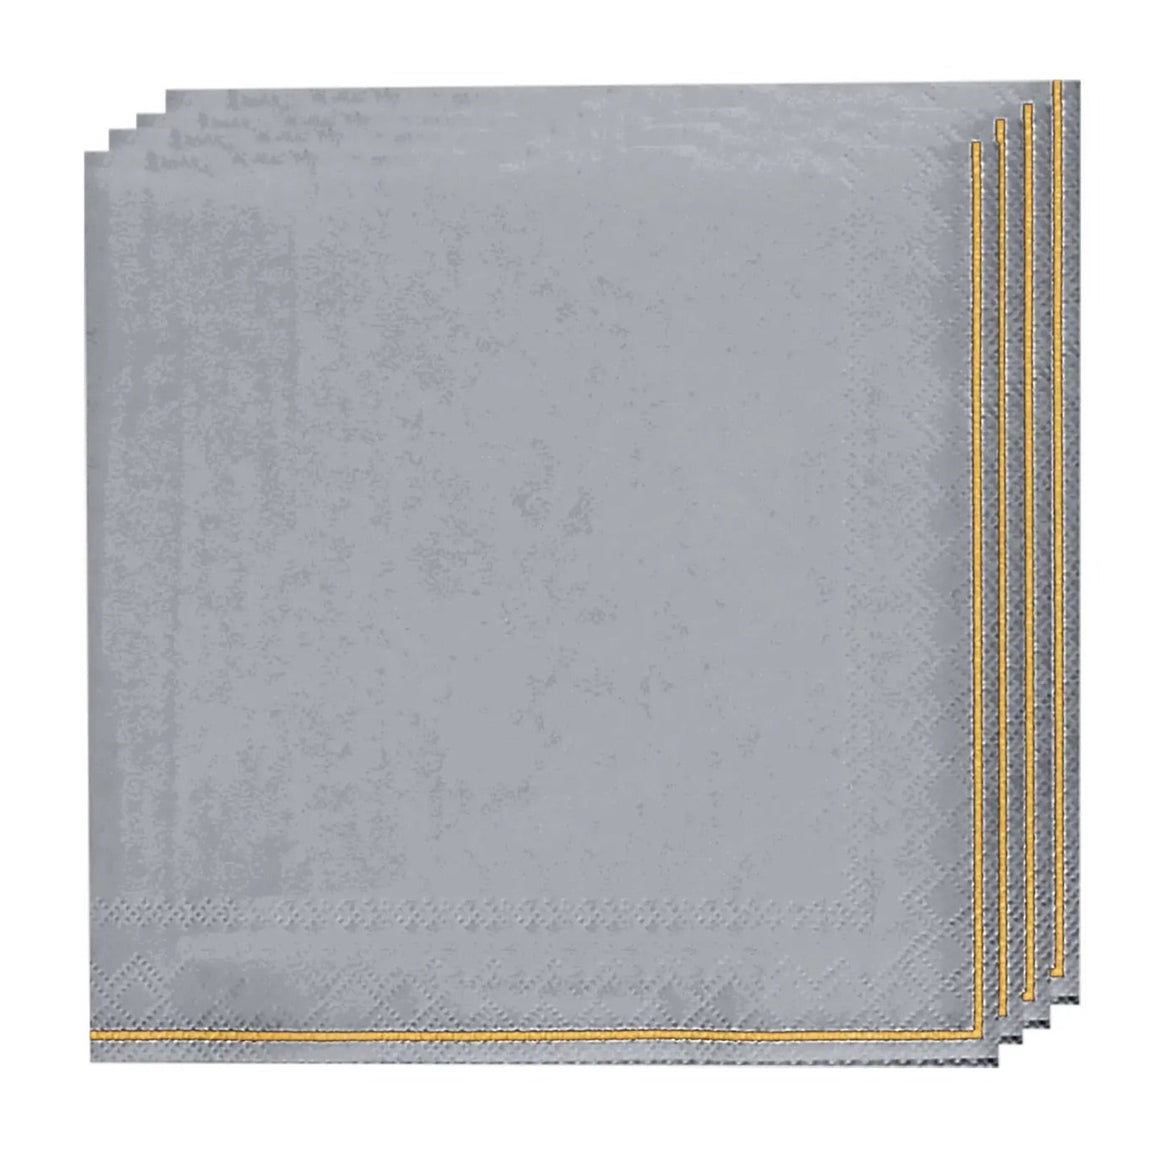 NAPKINS LARGE - GREY WITH GOLD STRIPE